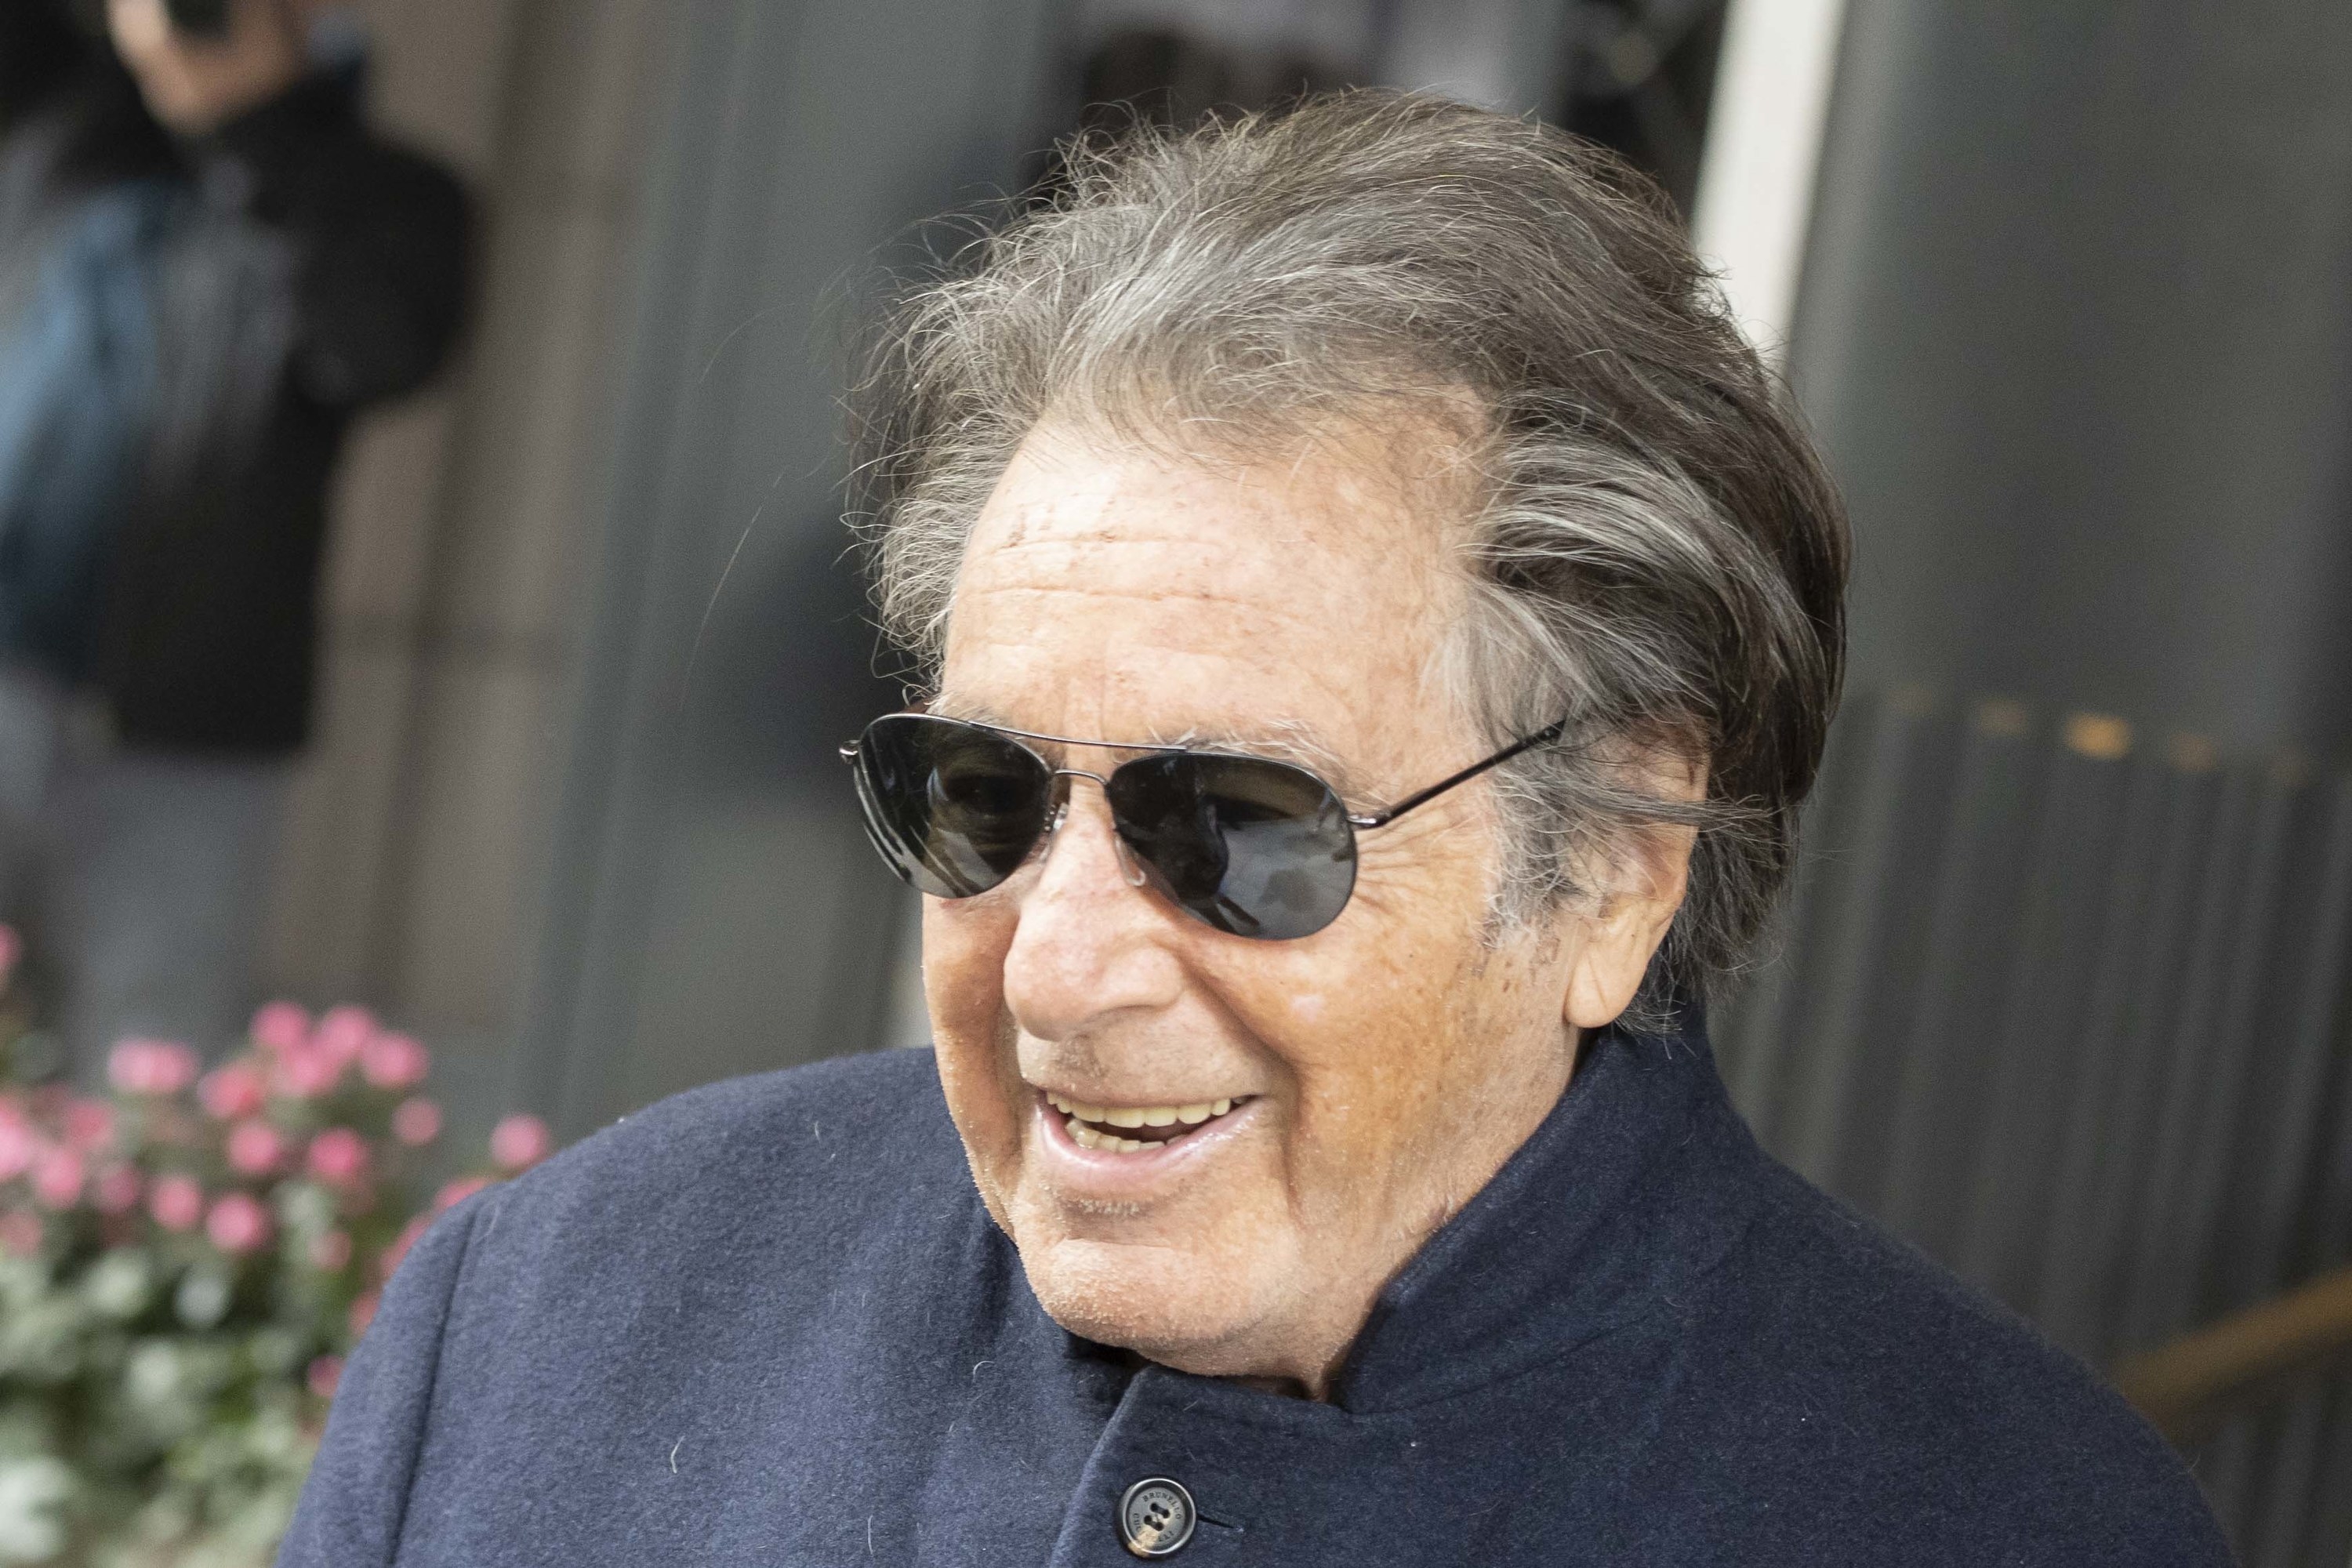 Al Pacino spotted at his hotel during the shooting in the city of the film House of Gucci